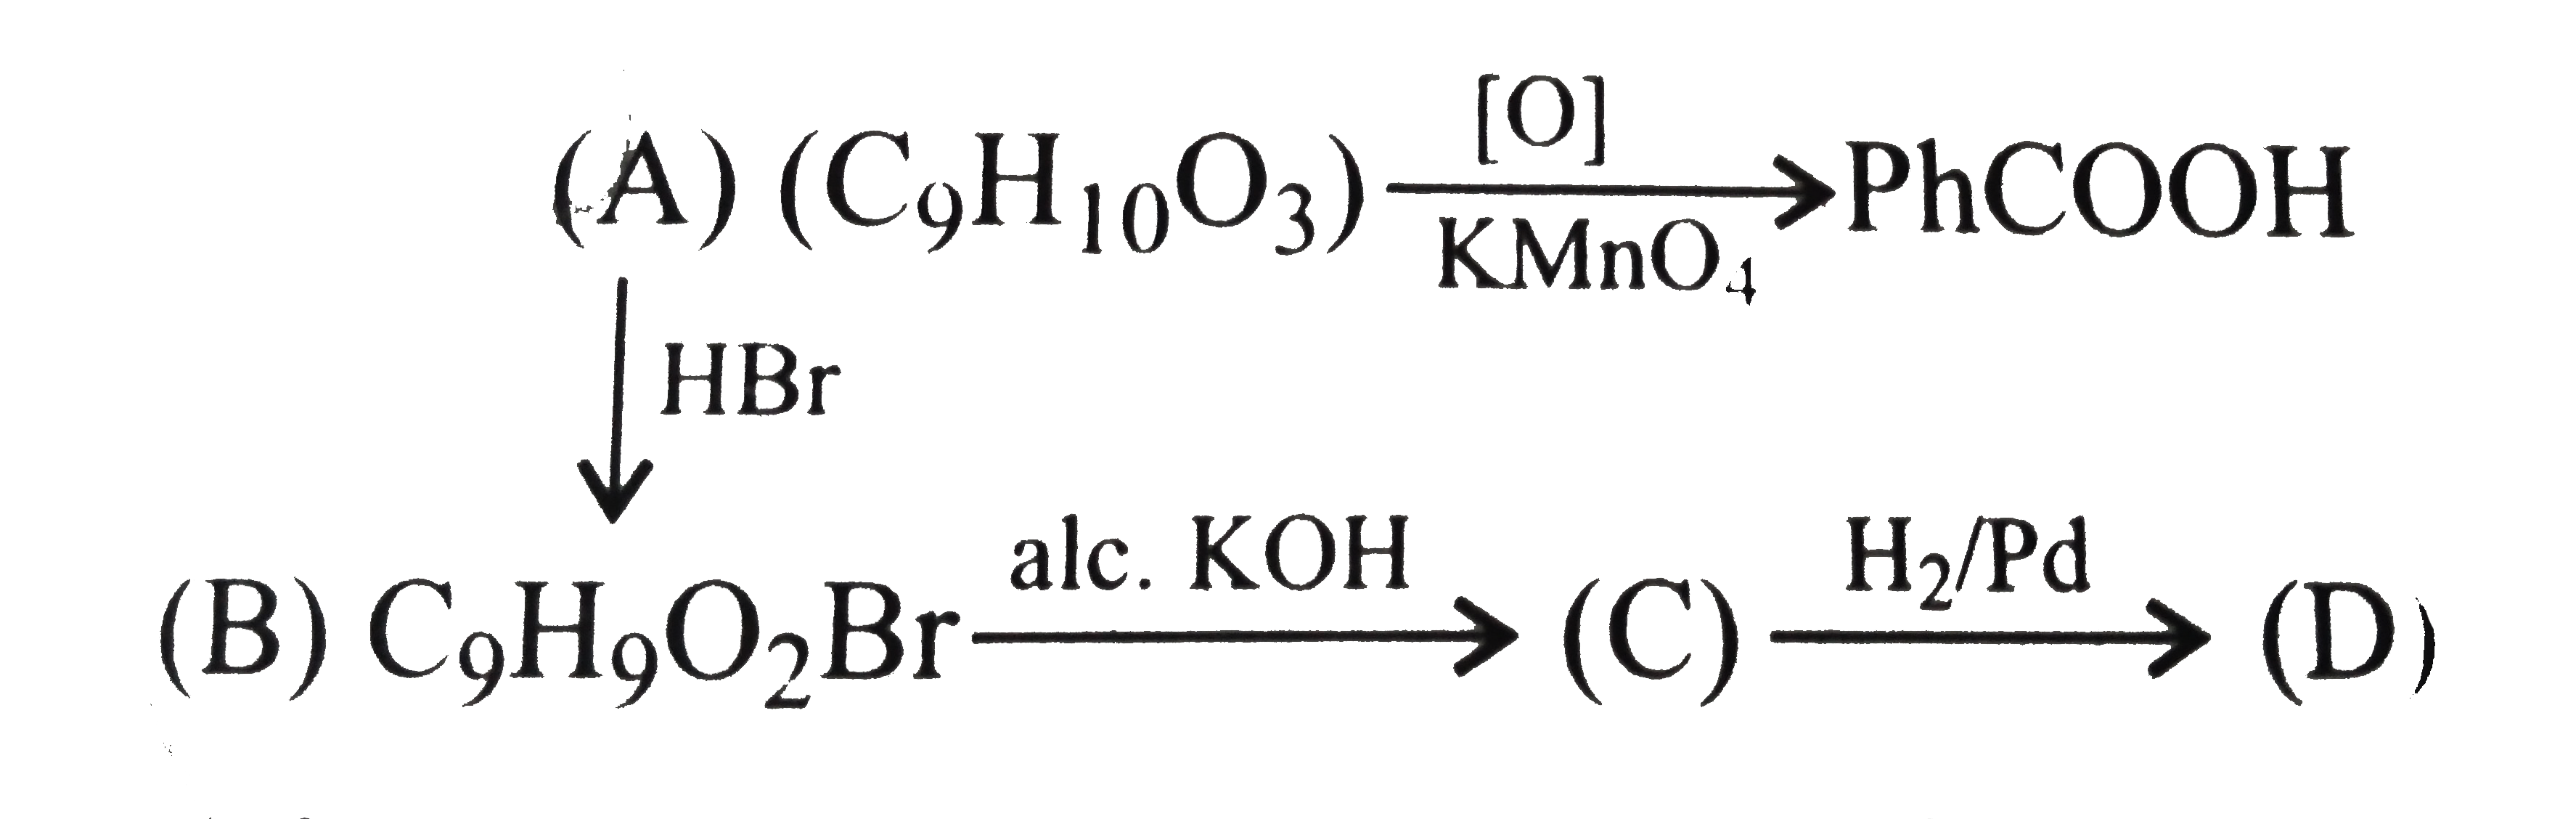 (i) Carboxylic acid    (ii) Compound (D) is prepard by carbonation(Mg//ether, CO2//H3 O^(+)) of compound    (iii) Compounds (A) and (D) give positive test with CrO3 in acid.   Compound (B) is :